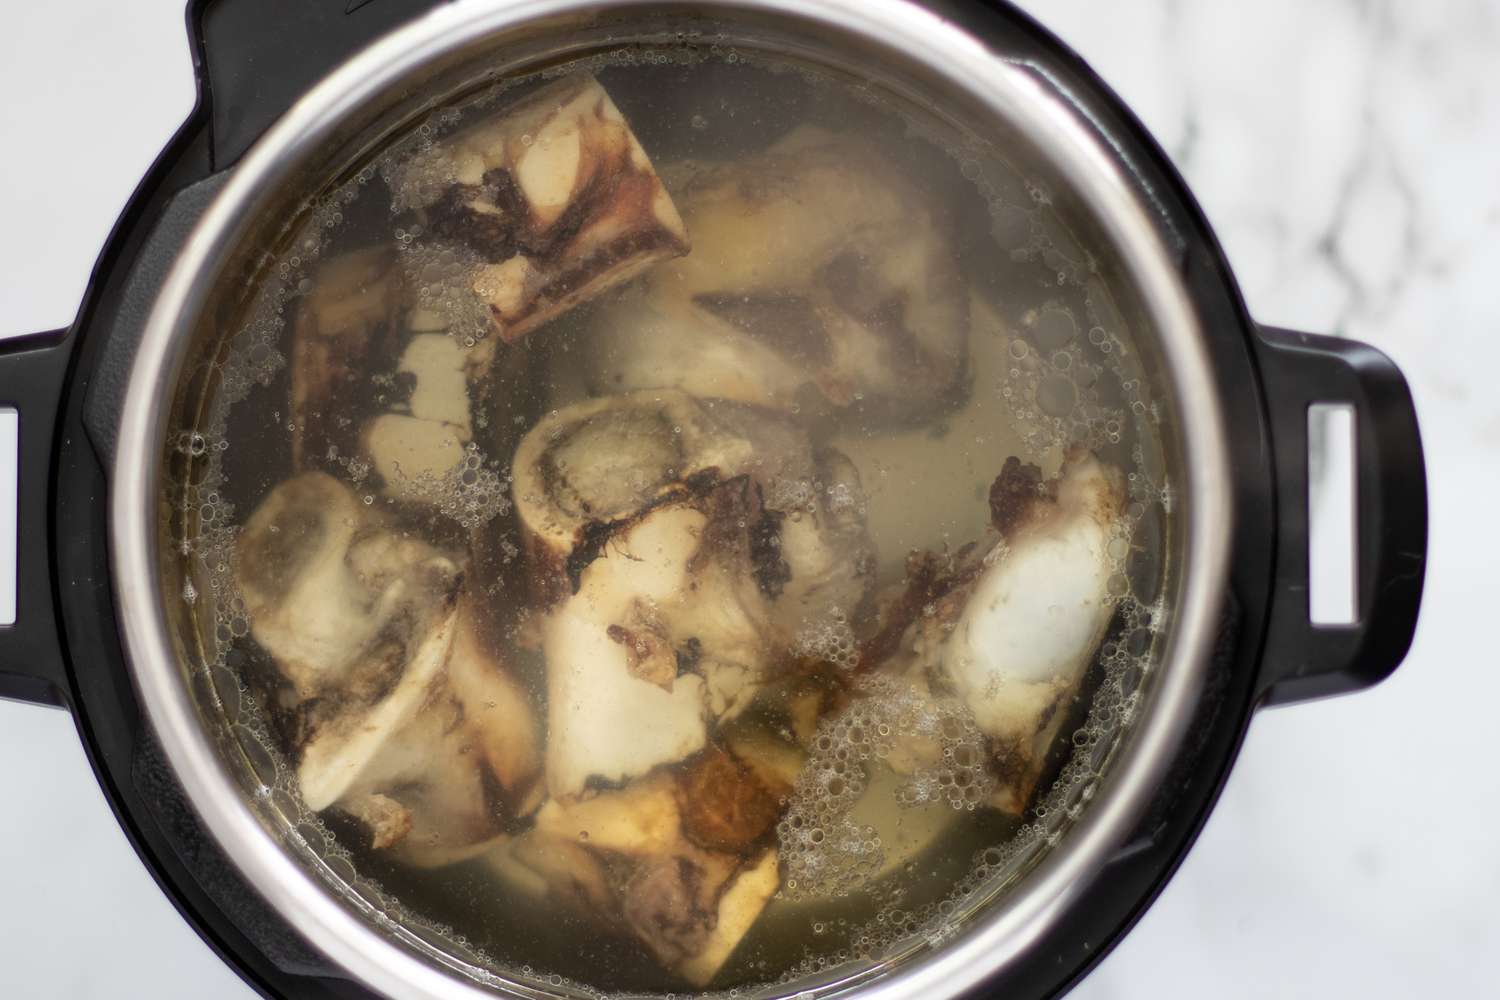 the roasted bones are boiled in the instant pot